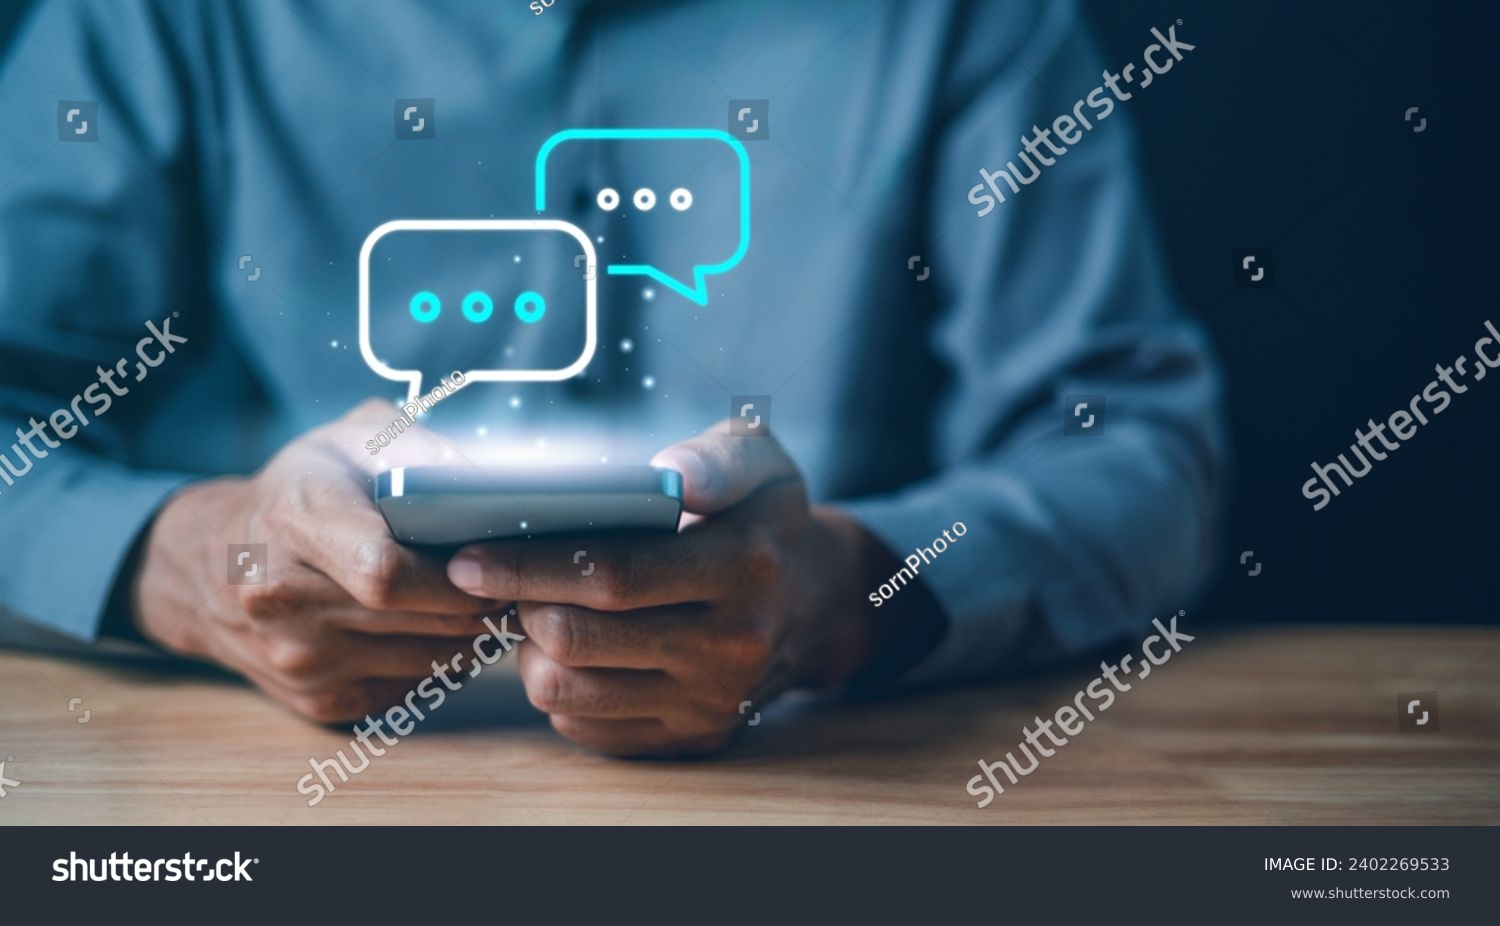 Technology, communication, Social media text messaging concepts, Businessman using smartphone texting message while sitting on table with in work office.	 #2402269533